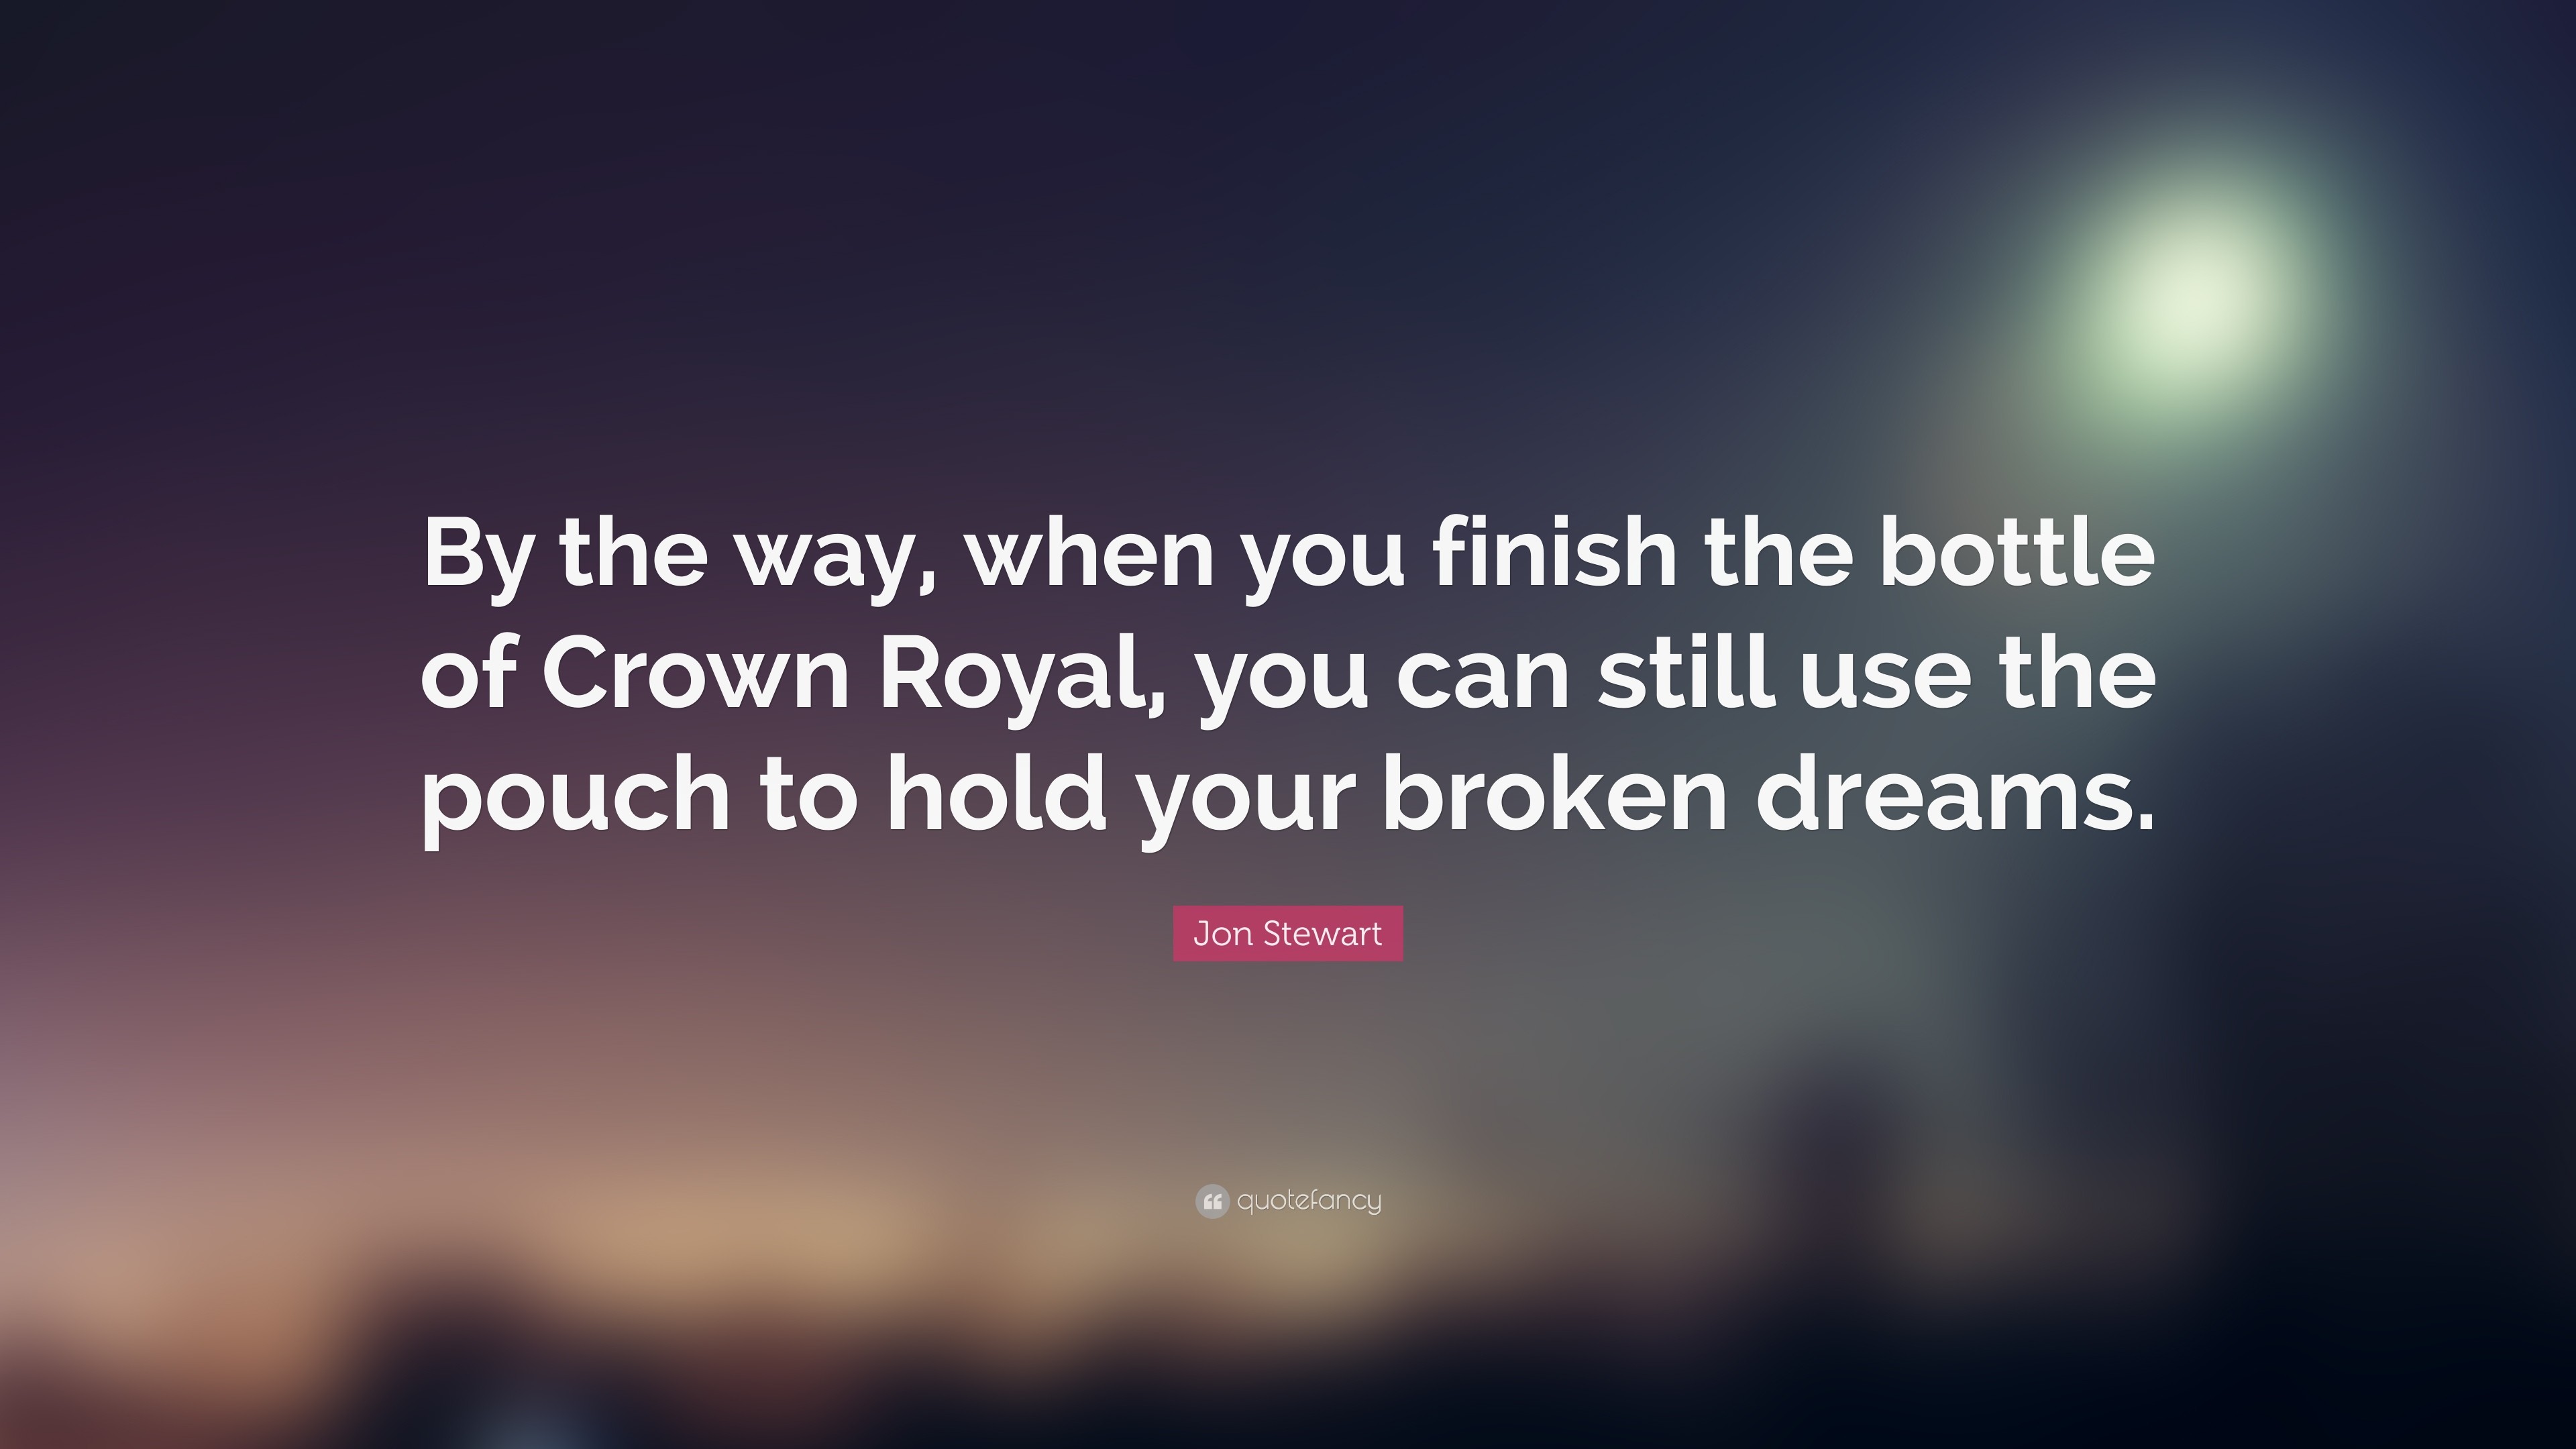 3840x2160 7 wallpapers. Jon Stewart Quote: “By the way, when you finish the bottle of  Crown